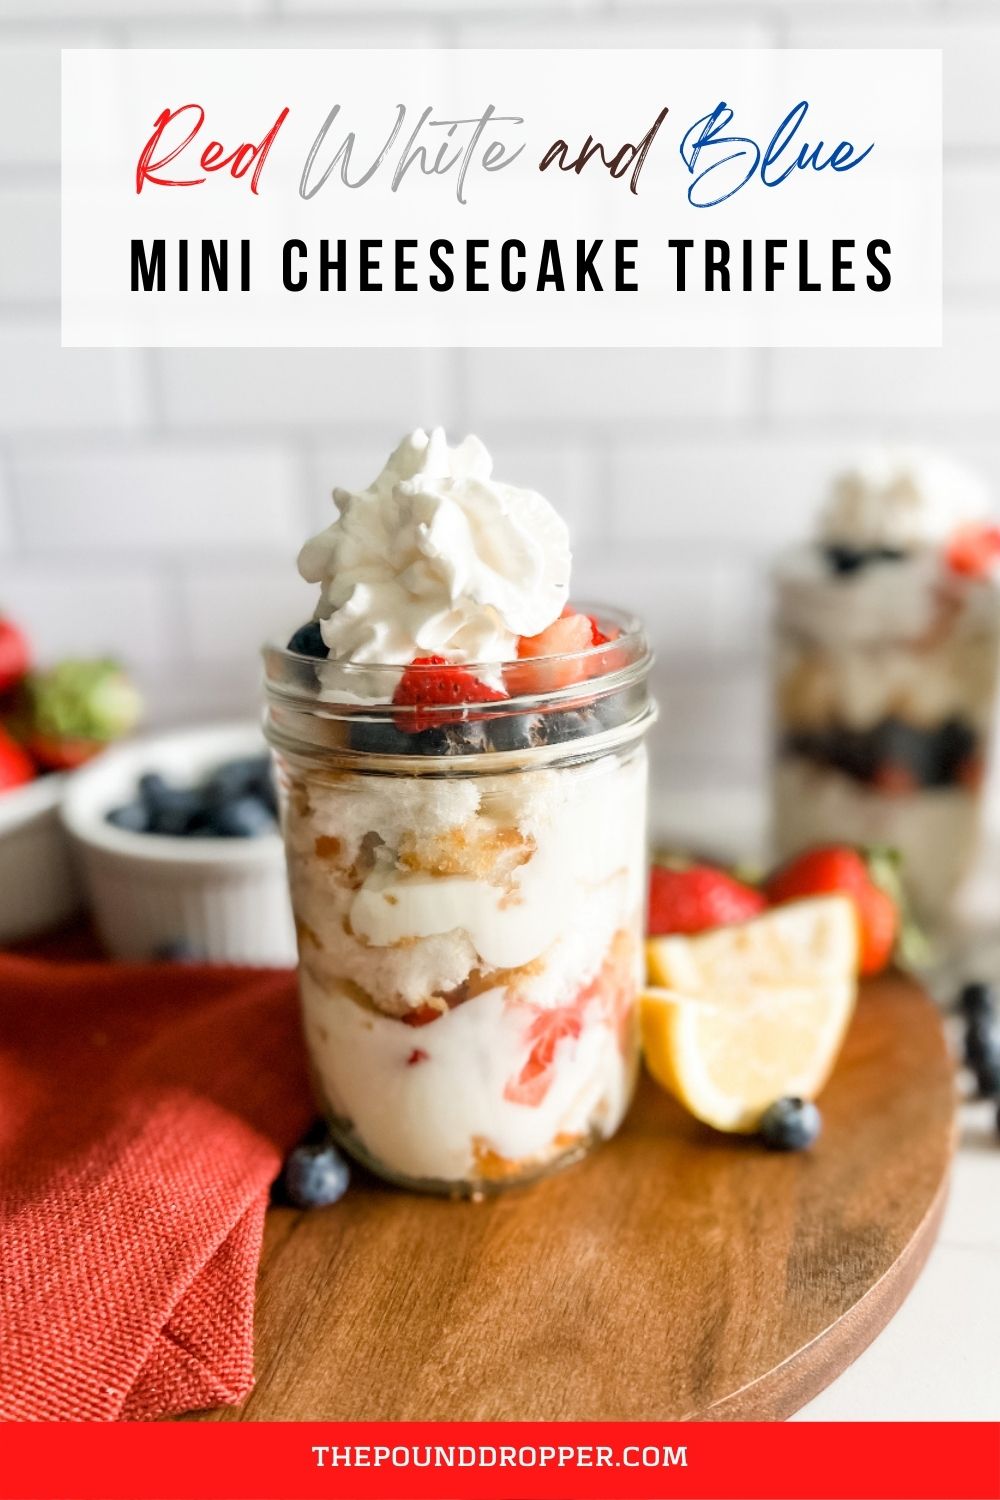 These Red White and Blue Mini Cheesecake Trifles are decadent, creamy, refreshing, and oh so delicious-packed with angel food cake, a homemade cheesecake yogurt layer, with juicy sweet strawberries, blueberries, and then topped with whipped topping! via @pounddropper